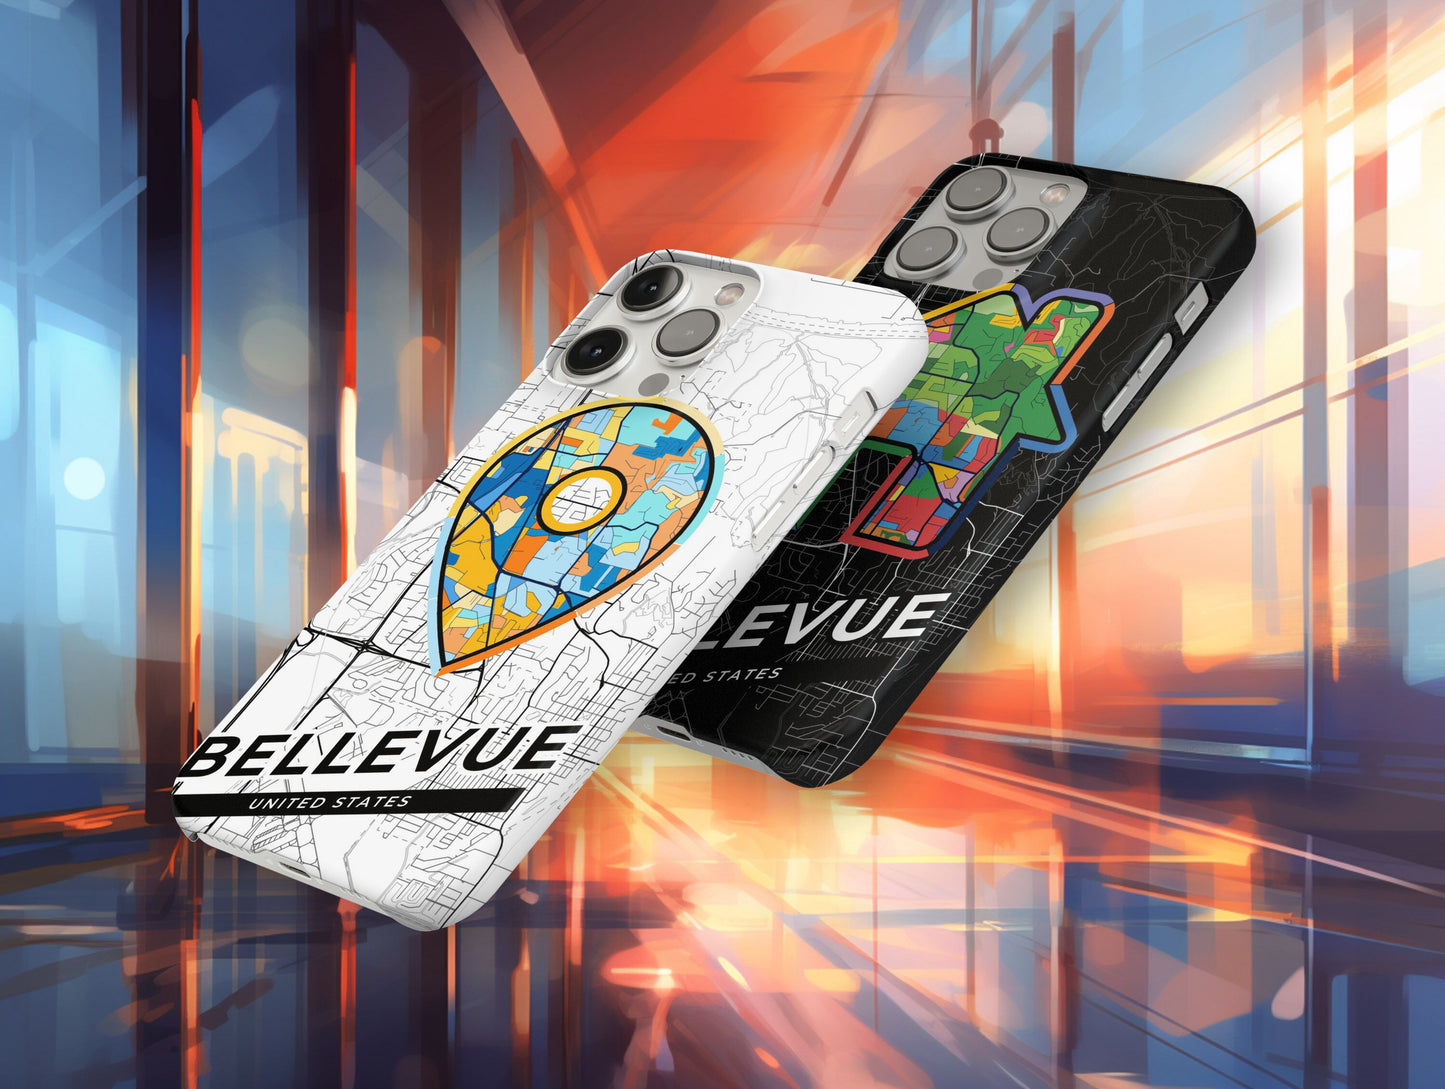 Bellevue Nebraska slim phone case with colorful icon. Birthday, wedding or housewarming gift. Couple match cases.